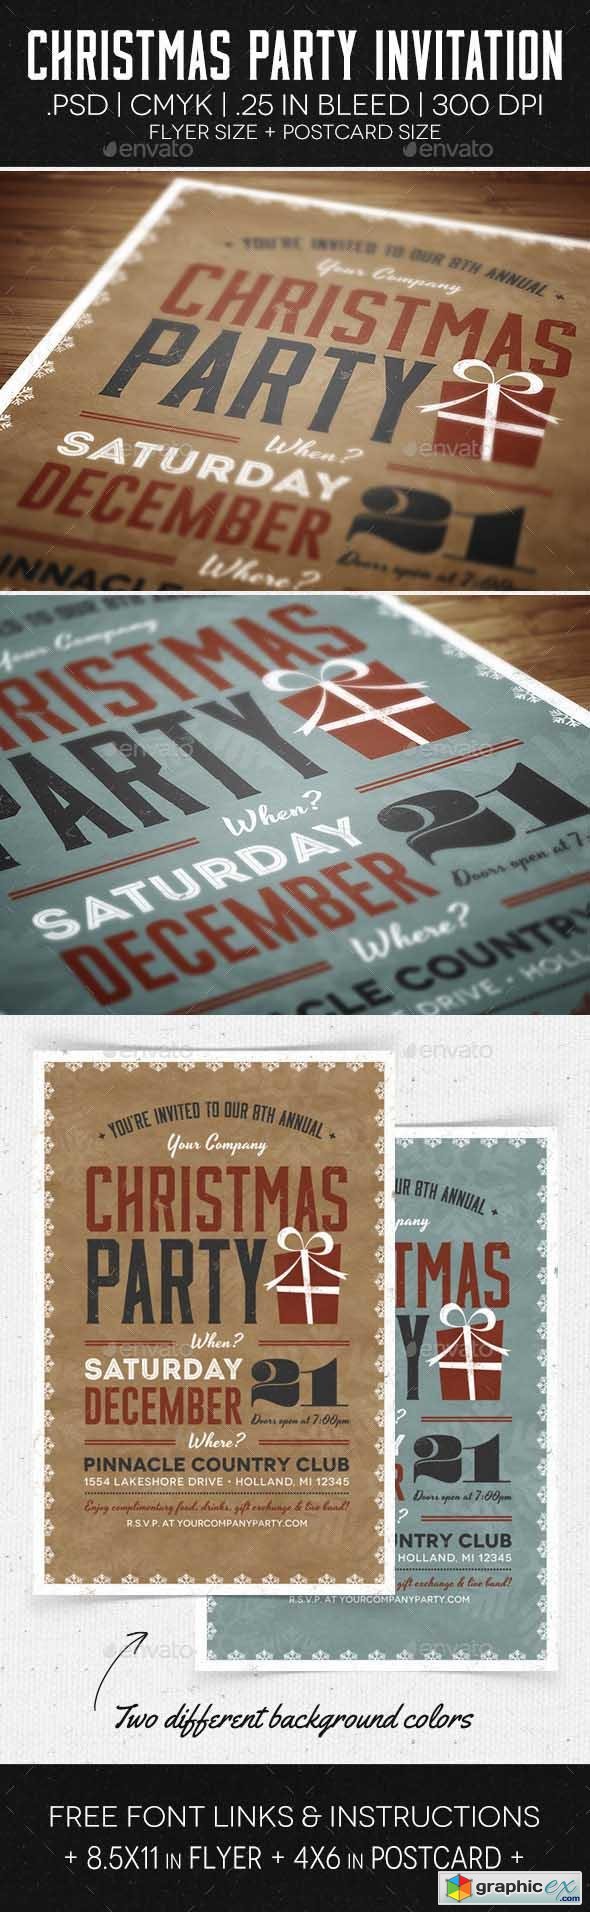 Christmas Party Flyer & Invitation 6176445